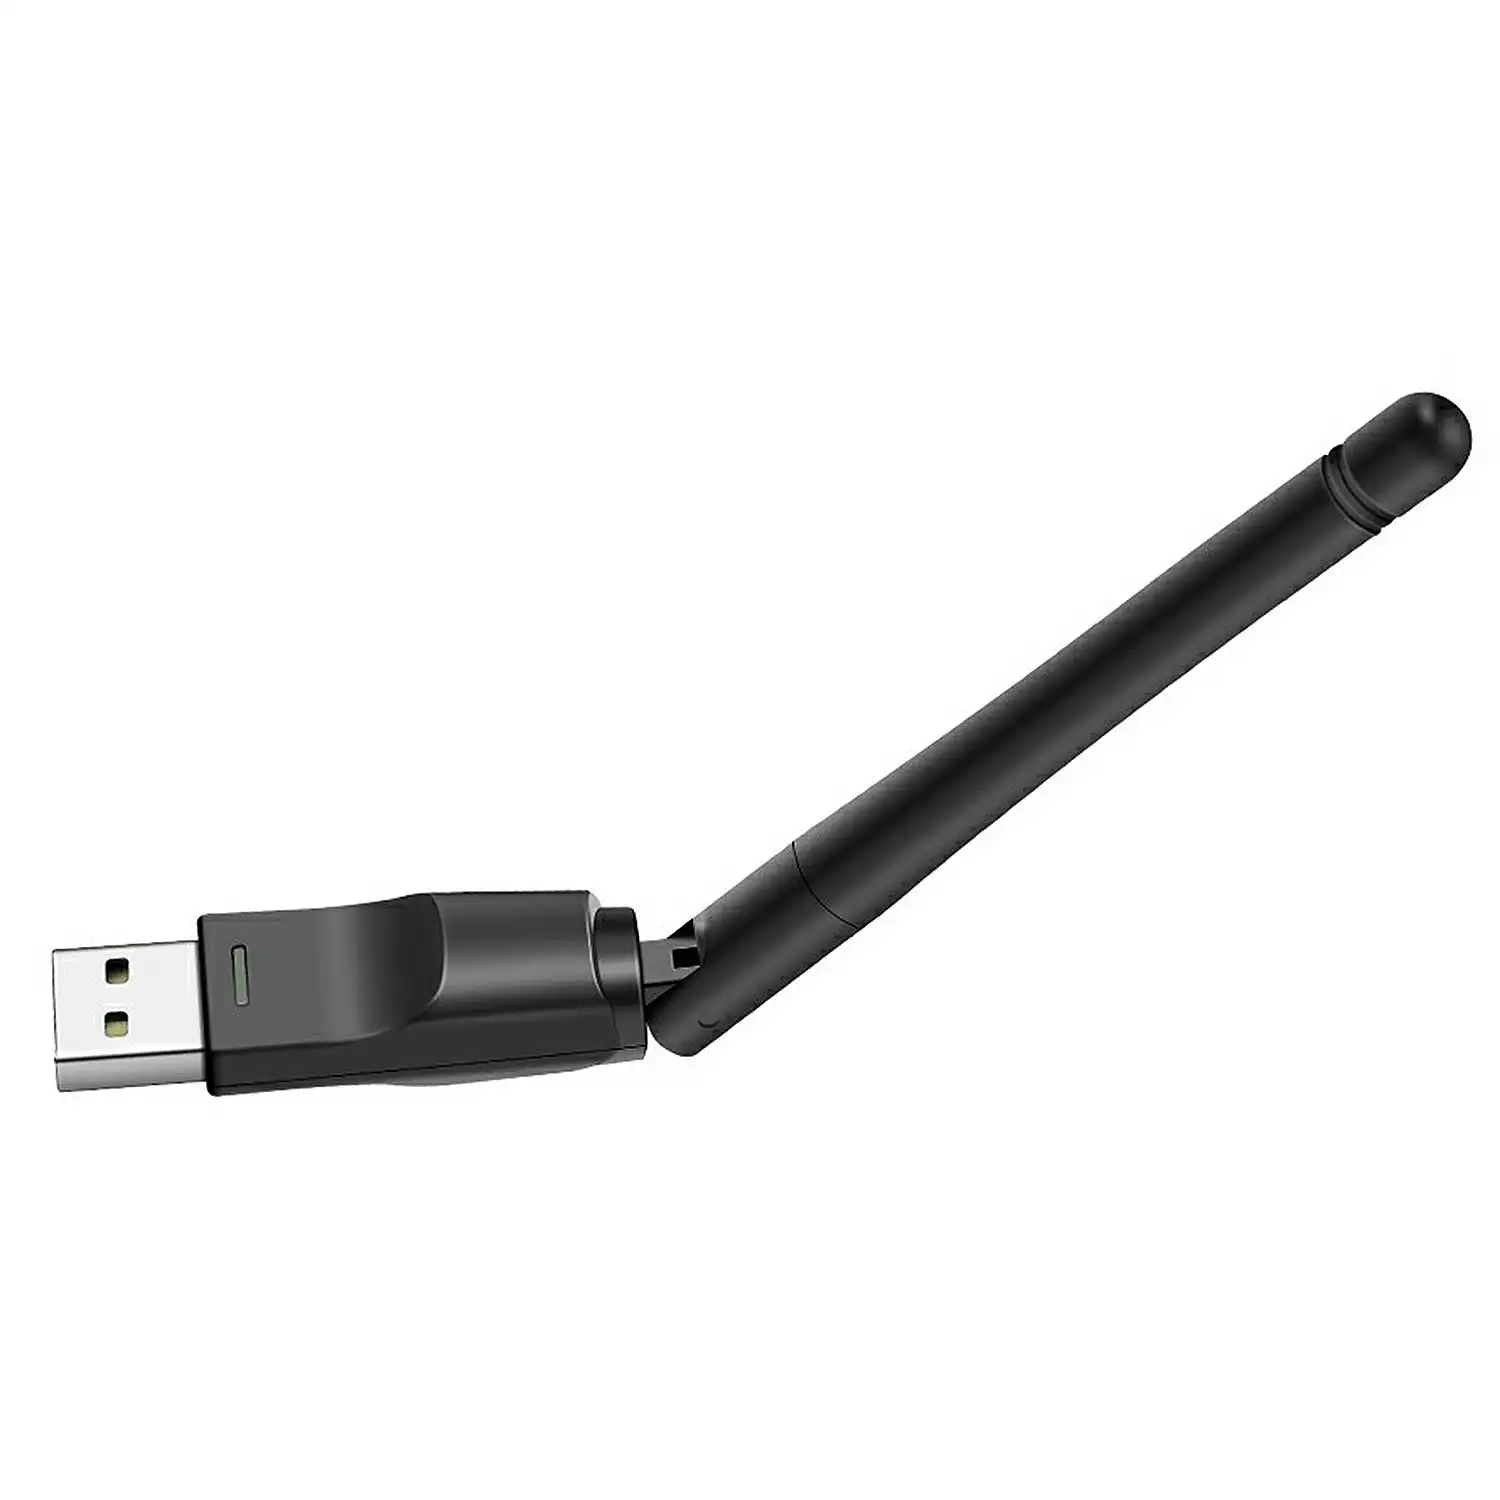 Adaptateur wifi Usb Rt5370 150Mbps USB2.0 dongle WiFi antenne sans fil pour Mag250 Mag 250 254 256 Htv Openbox tv box 5 PC